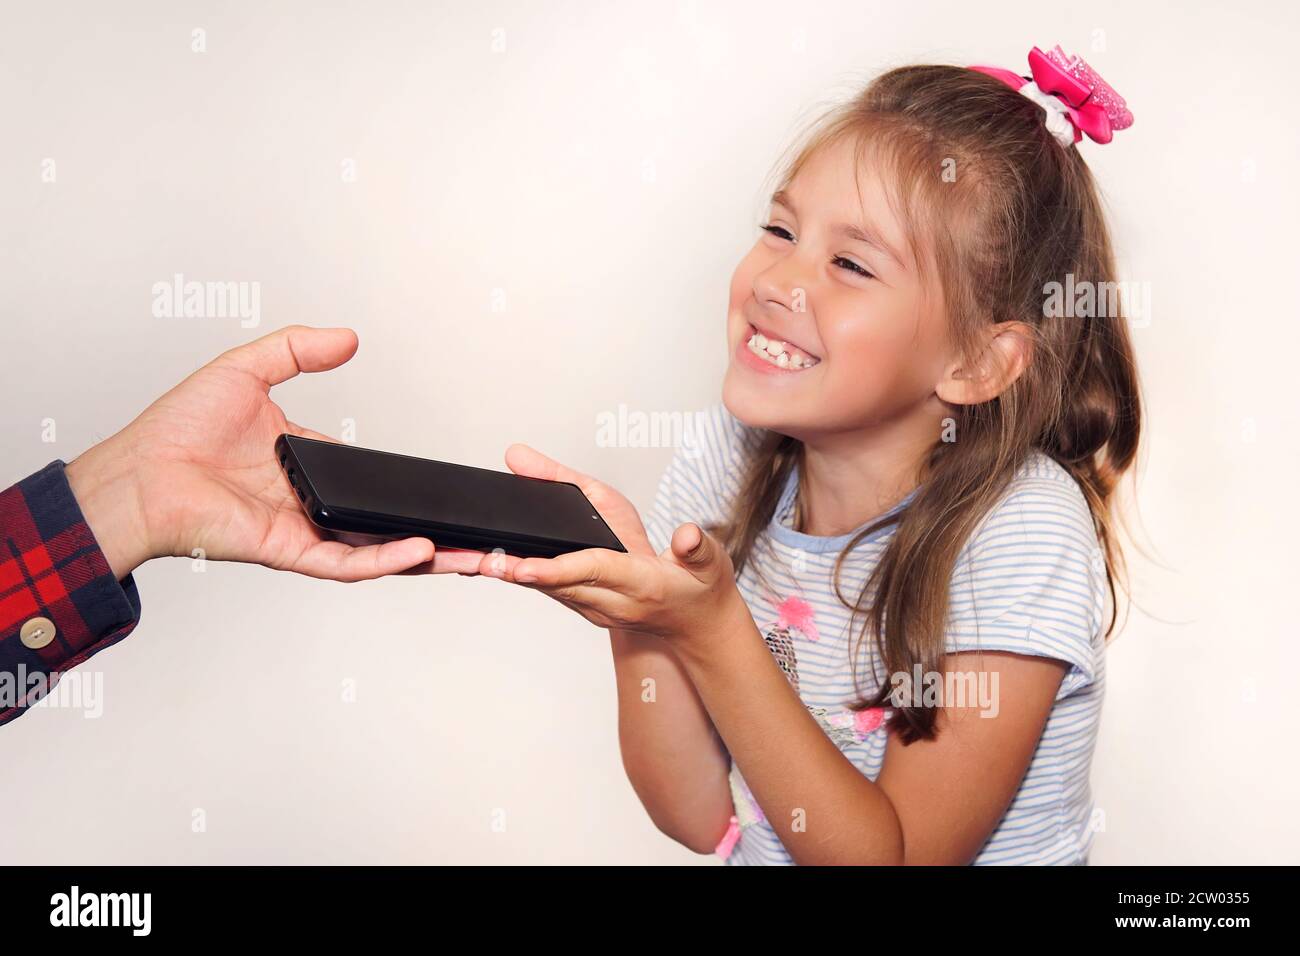 father gives a gift to his daughter on her birthday. A man's hand passes a black new smartphone to the girl in close-up. A happy child grabs the phone Stock Photo